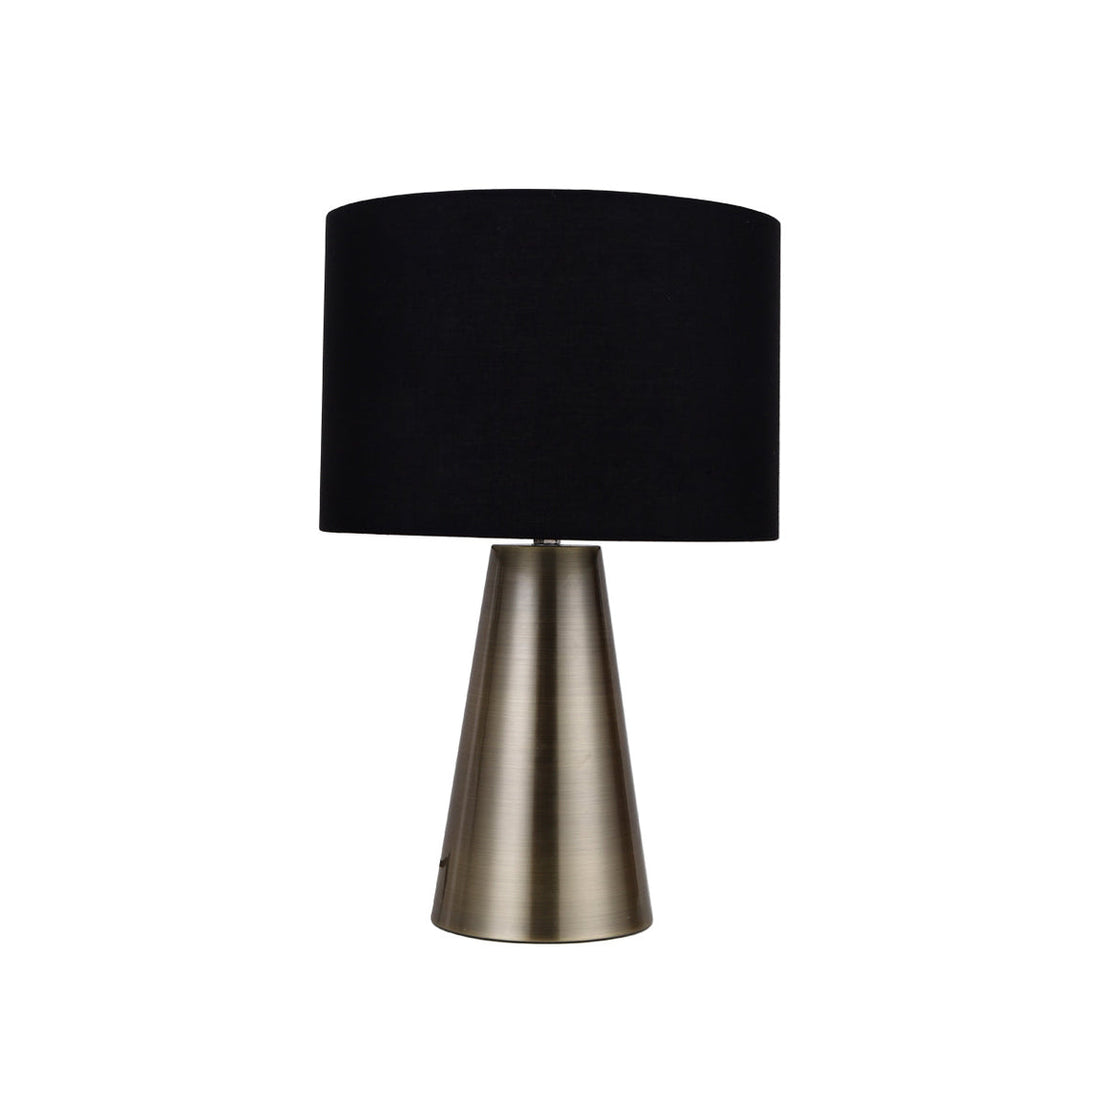 Tayla Black and Antique Brass Contemporary Touch Lamp